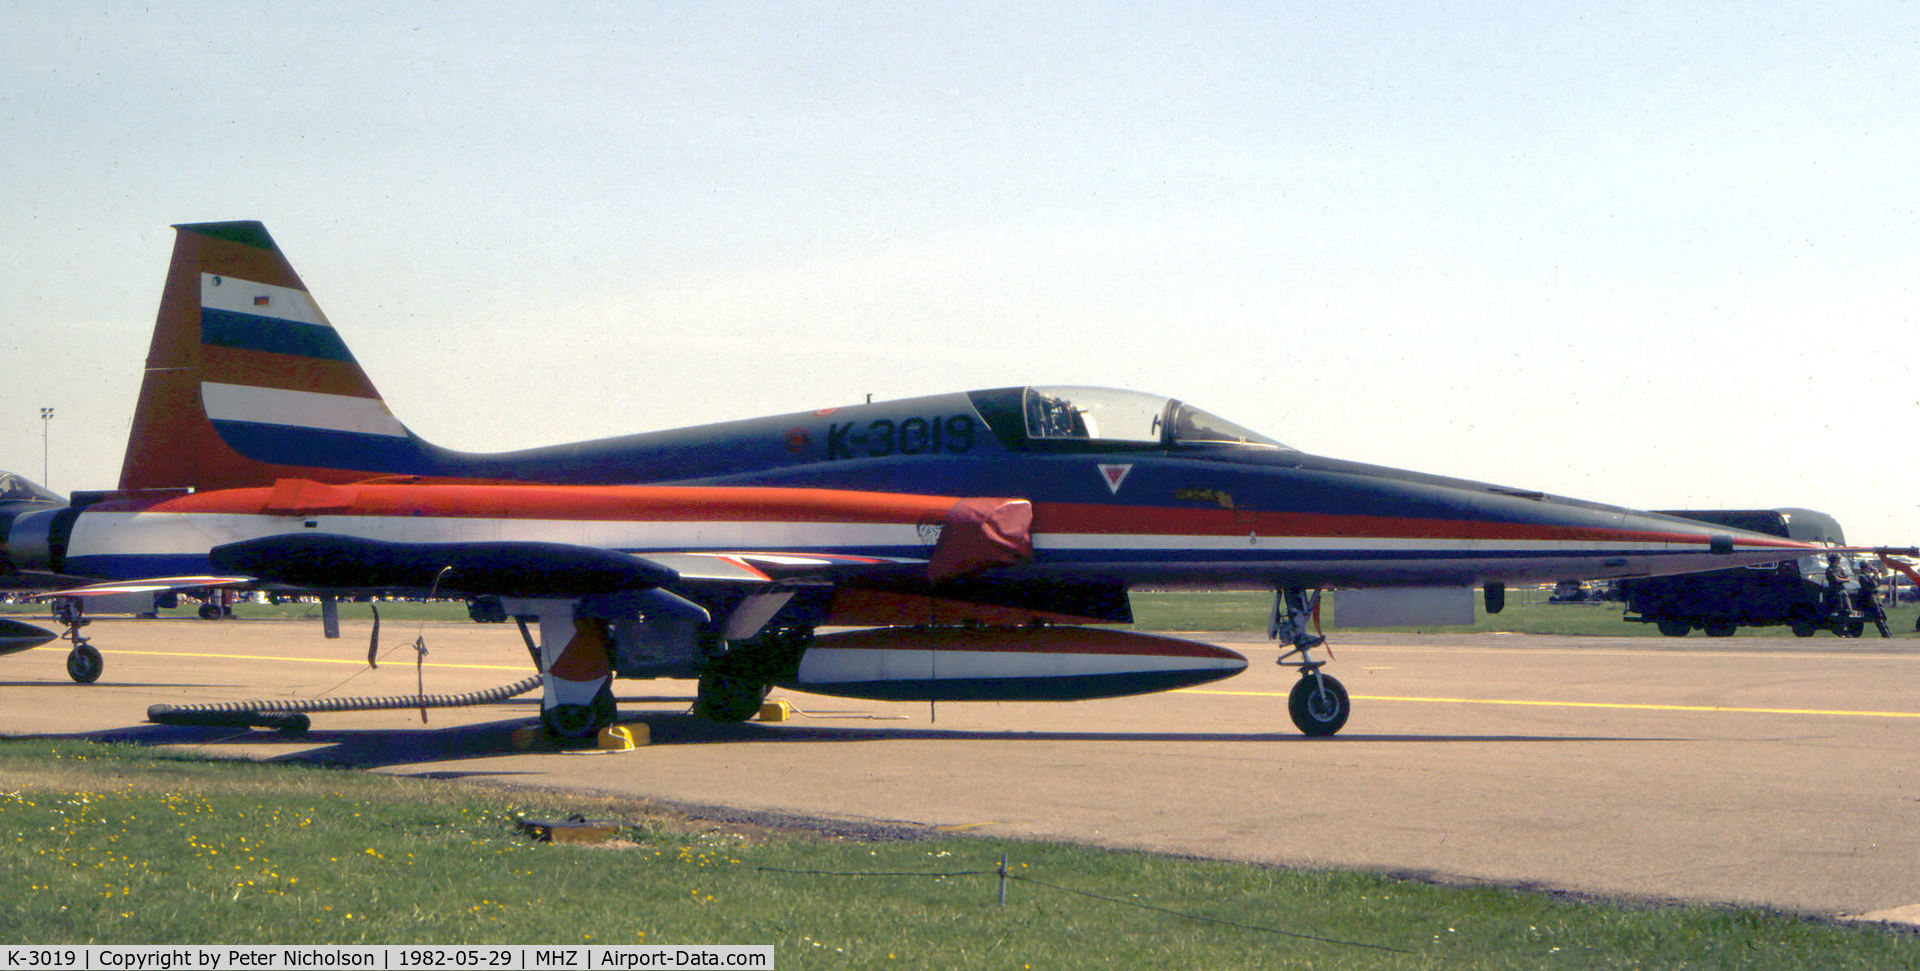 K-3019, 1970 Canadair NF-5A Freedom Fighter C/N 3019, NF-5A of 315 Squadron Royal Netherlands Air Force on display at the 1982 RAF Mildenhall Air Fete.